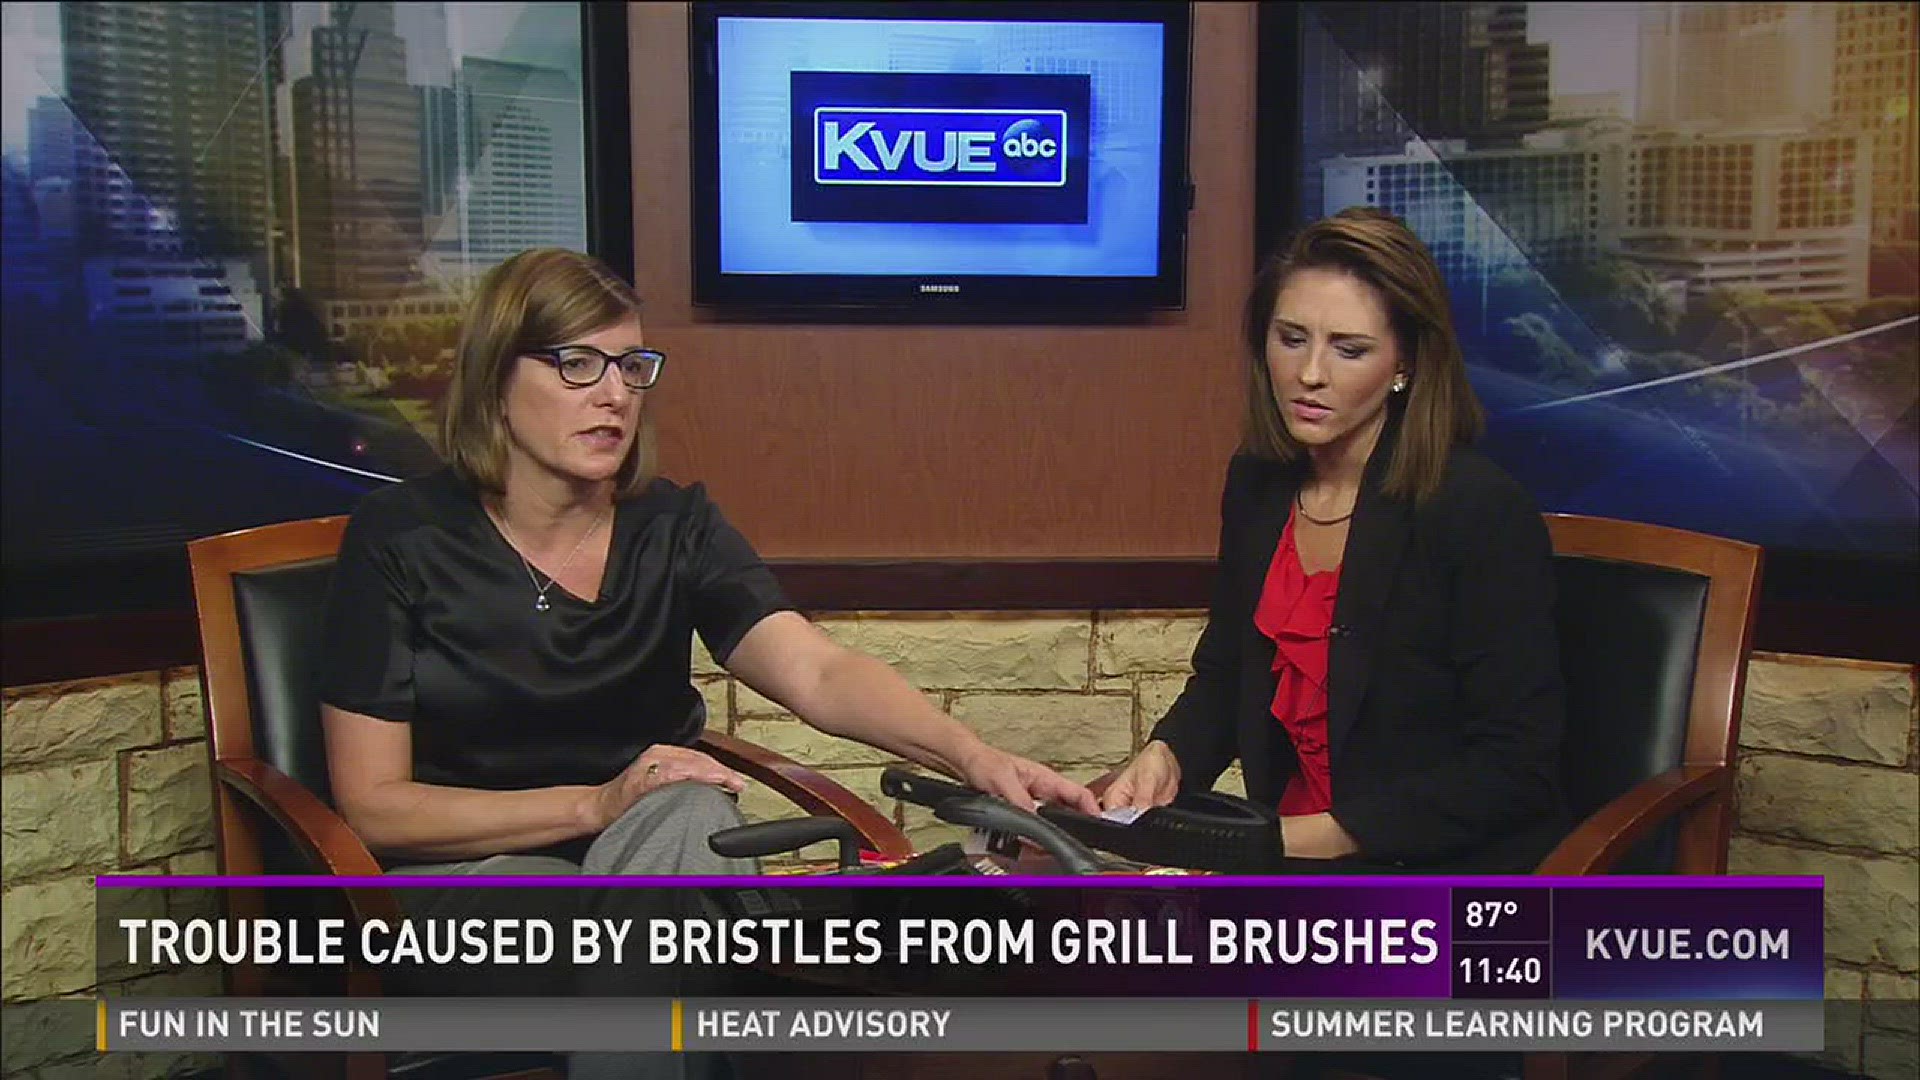 Trouble caused by bristles from grill brushes